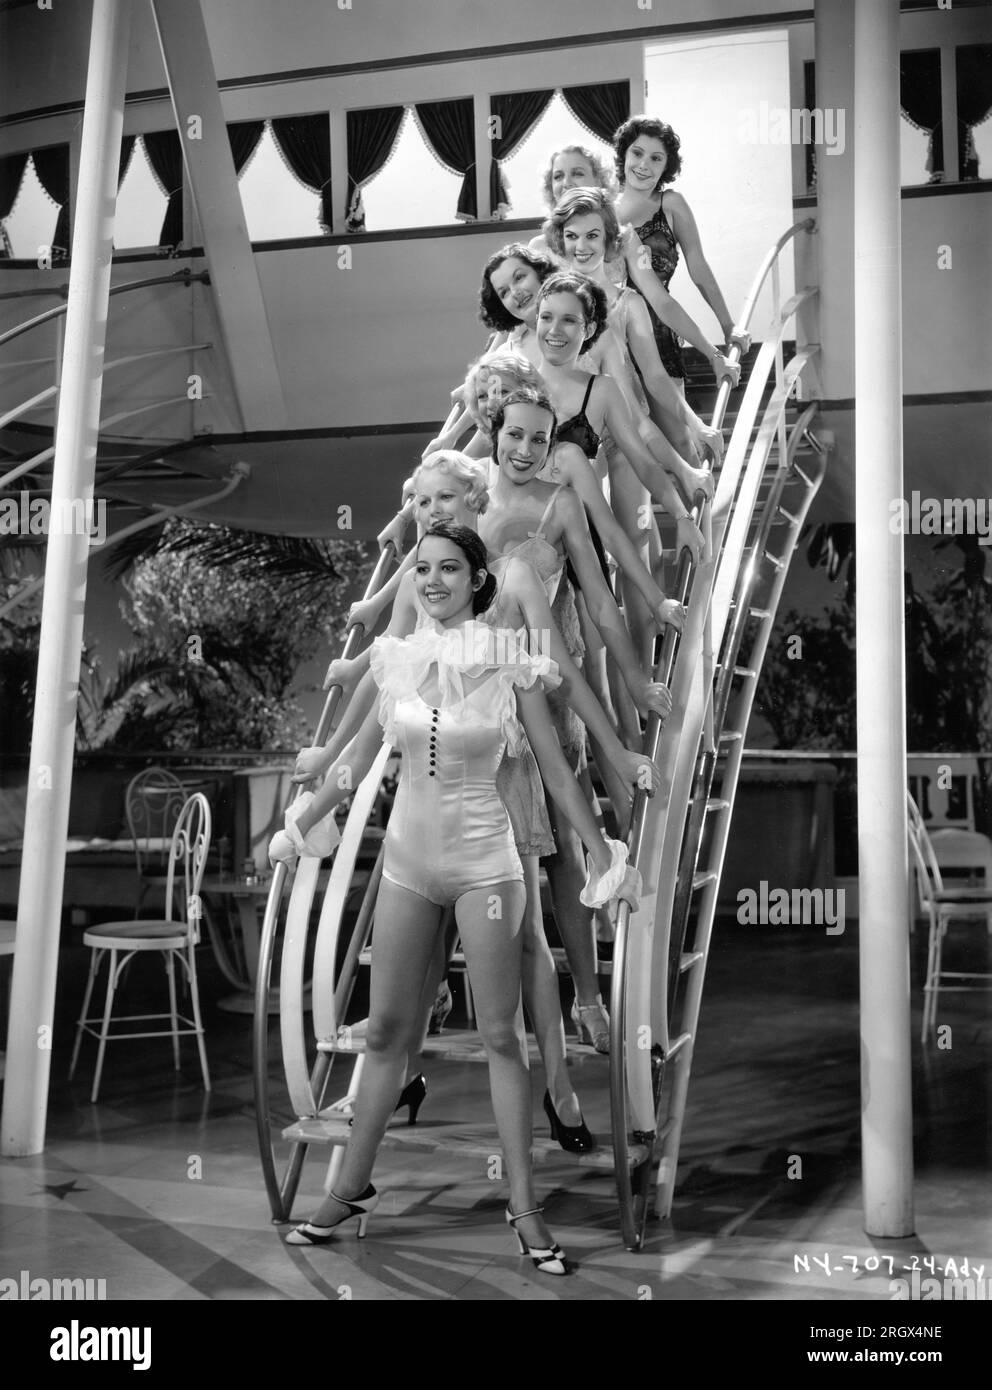 MOVITA CASTANEDA (front) and other Chorines / Chorus Girls pose on the Dirigible nightclub set publicity for FLYING DOWN TO RIO 1933 director THORNTON FREELAND music Vincent Youmans lyrics Gus Kahn and Edward Eliscu costumes Walter Plunkett and (uncredited) Irene RKO Radio Pictures Stock Photo